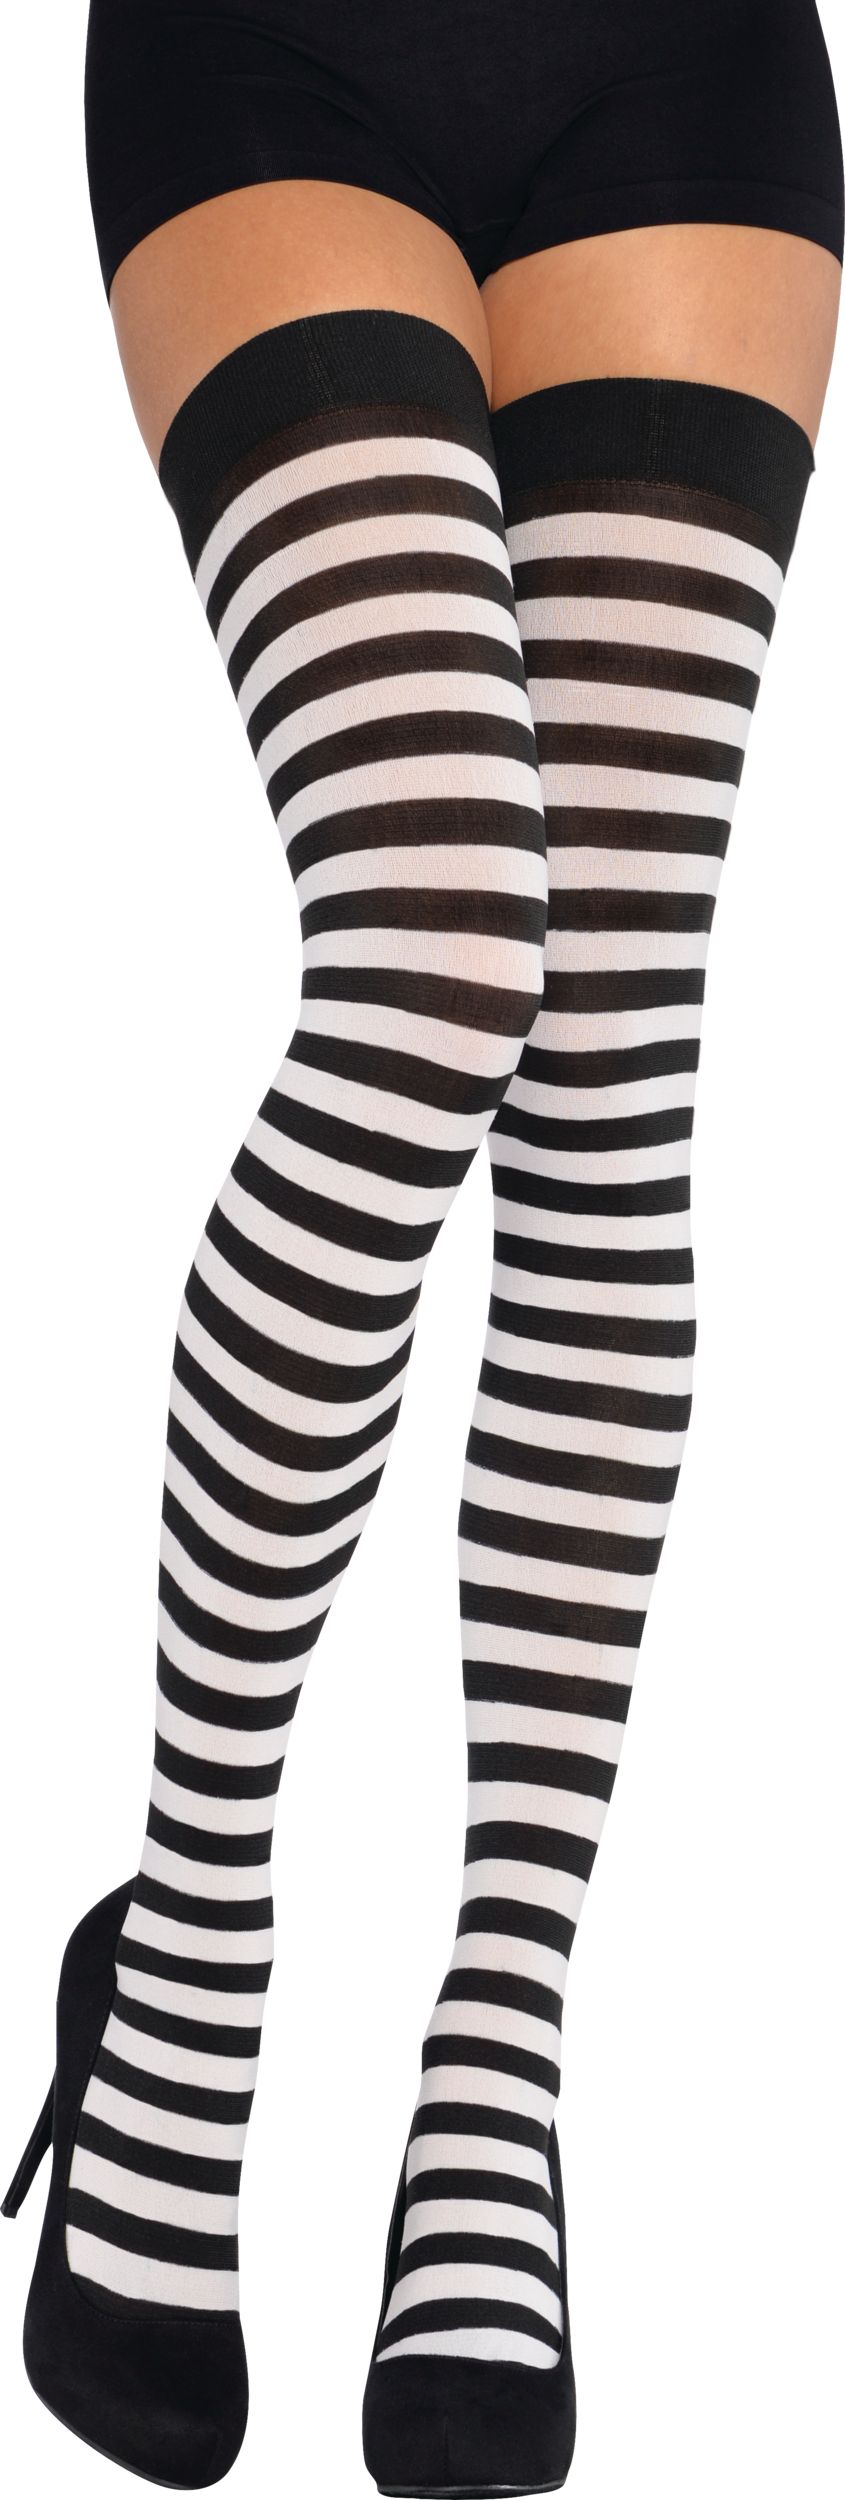 Adult Knee-High Stocking Tights, Black, One Size, Wearable Costume  Accessory for Halloween